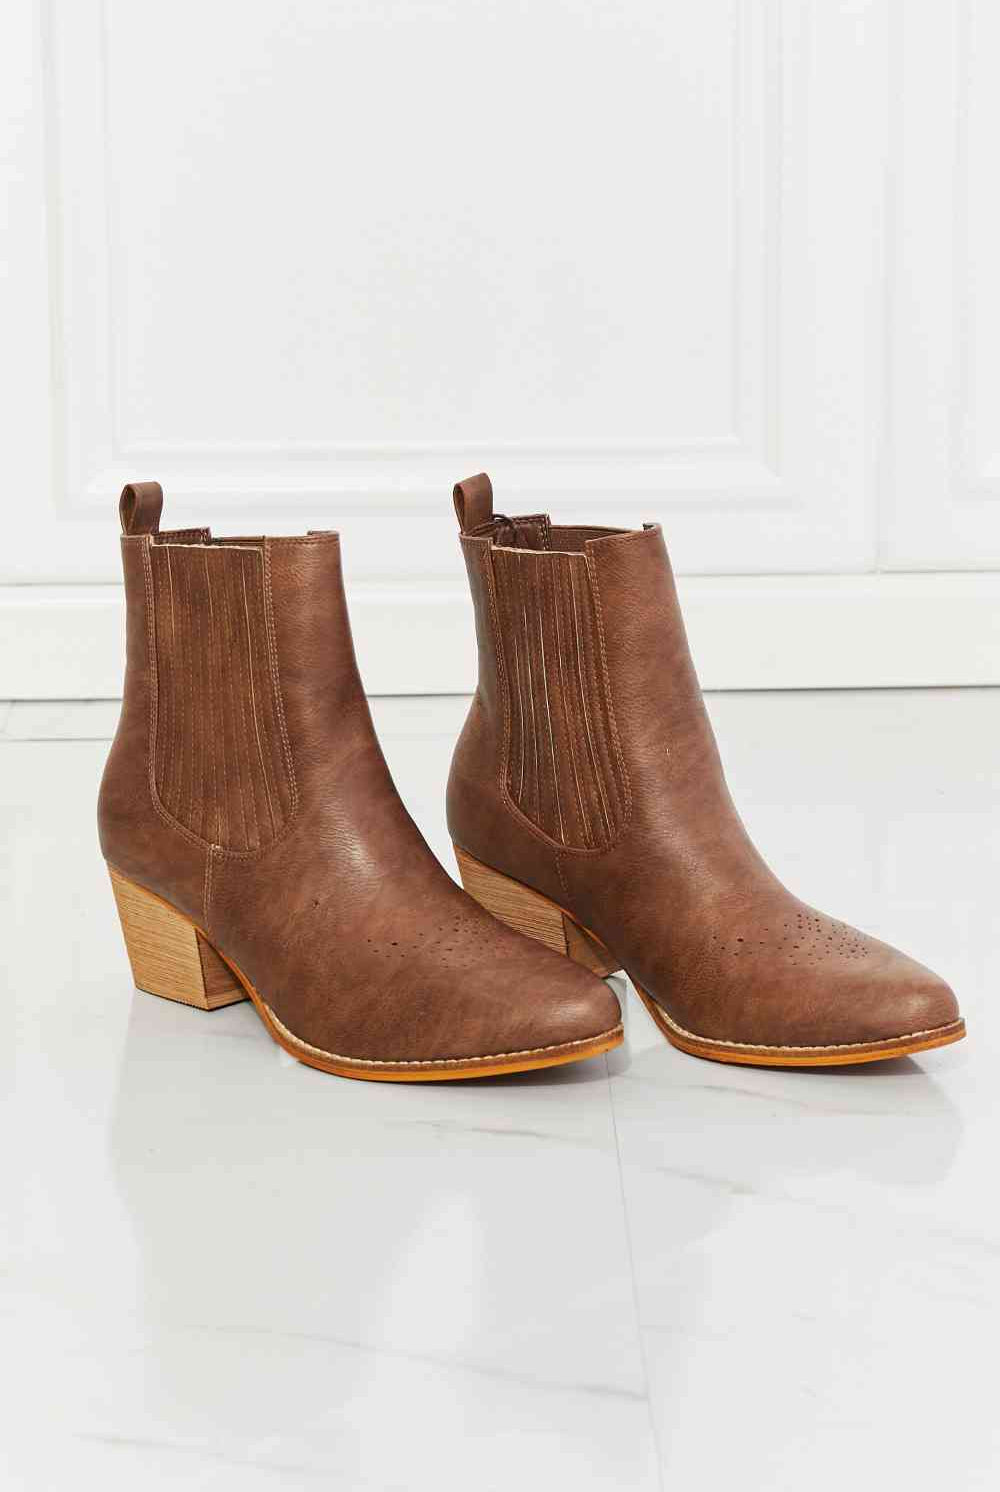 Lavender MMShoes Love the Journey Stacked Heel Chelsea Boot in Chestnut Shoes